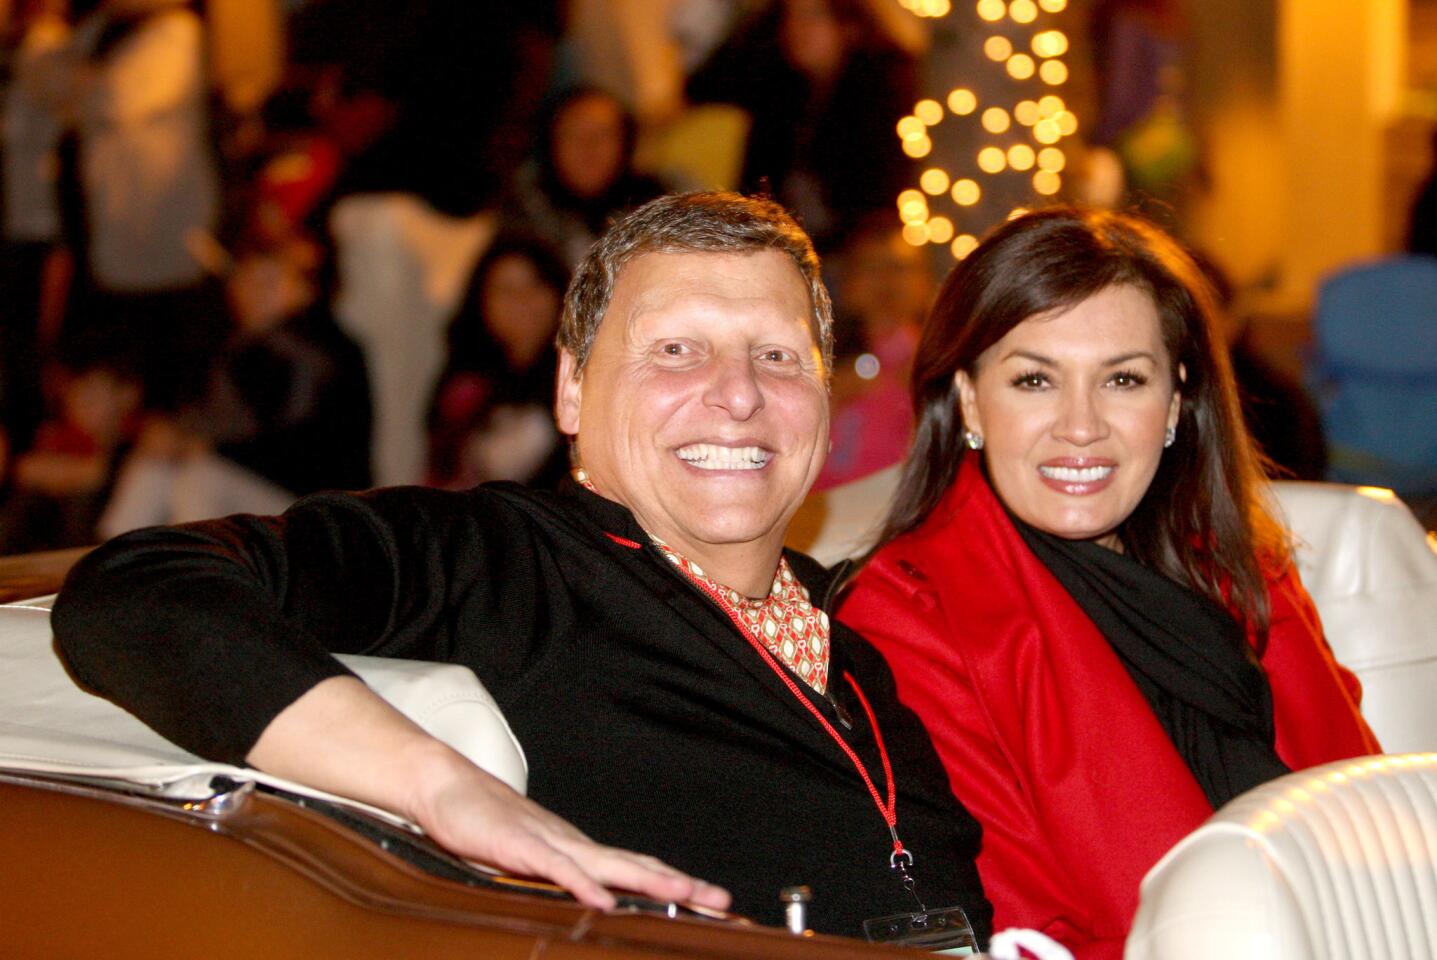 Photo Gallery: Annual Montrose-Glendale Christmas parade